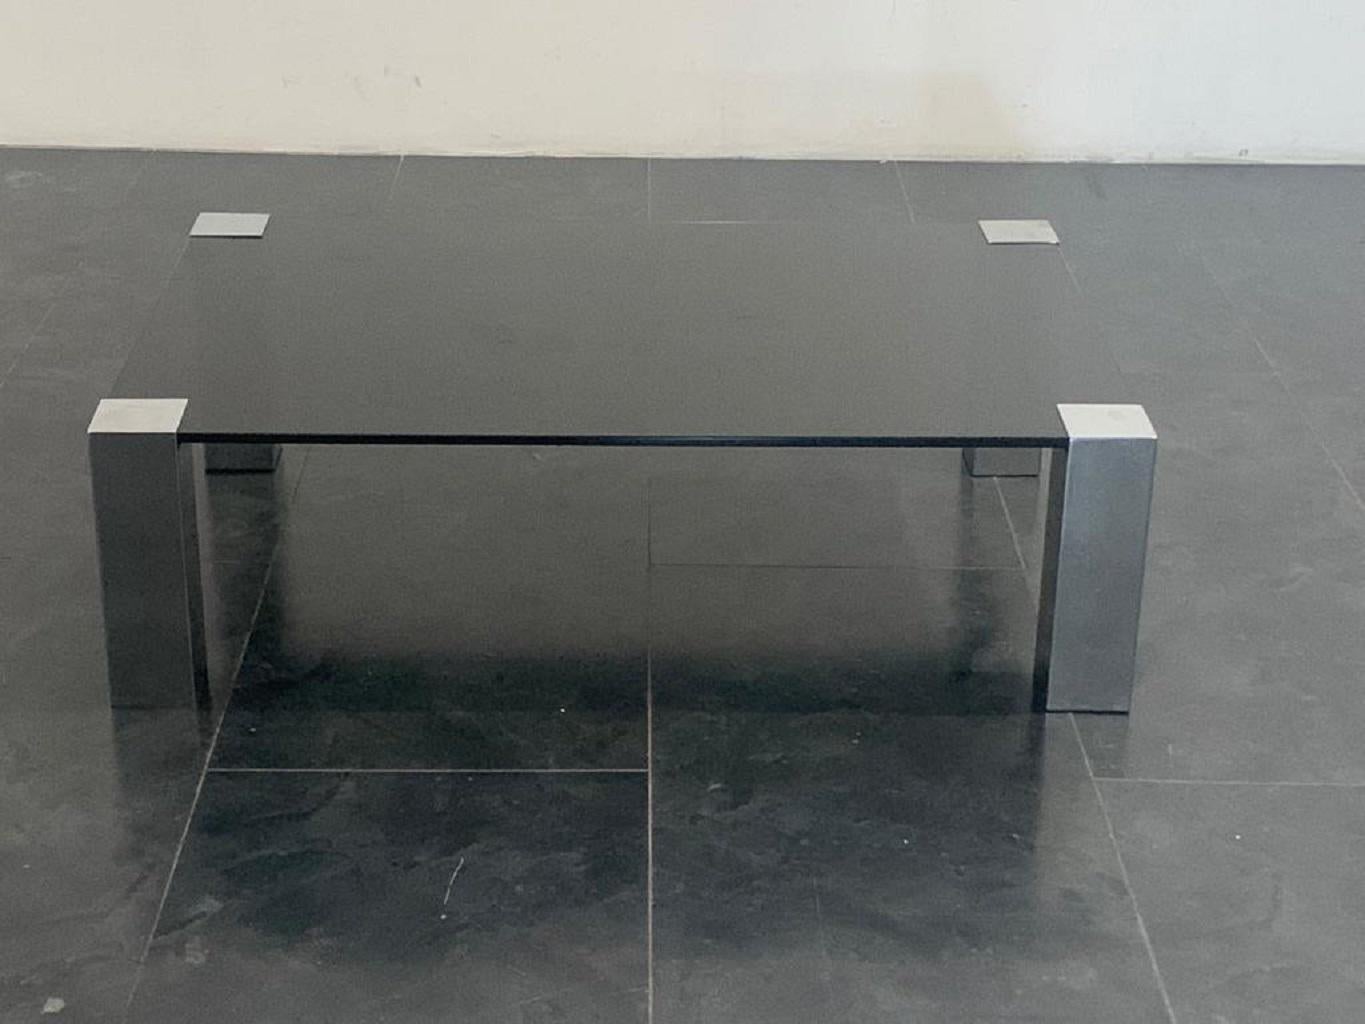 CIDUE steel coffee table with anthracite colored crystal.
Packaging with bubble wrap and cardboard boxes is included. If the wooden packaging is needed (fumigated crates or boxes) for US and International Shipping, it's required a separate cost